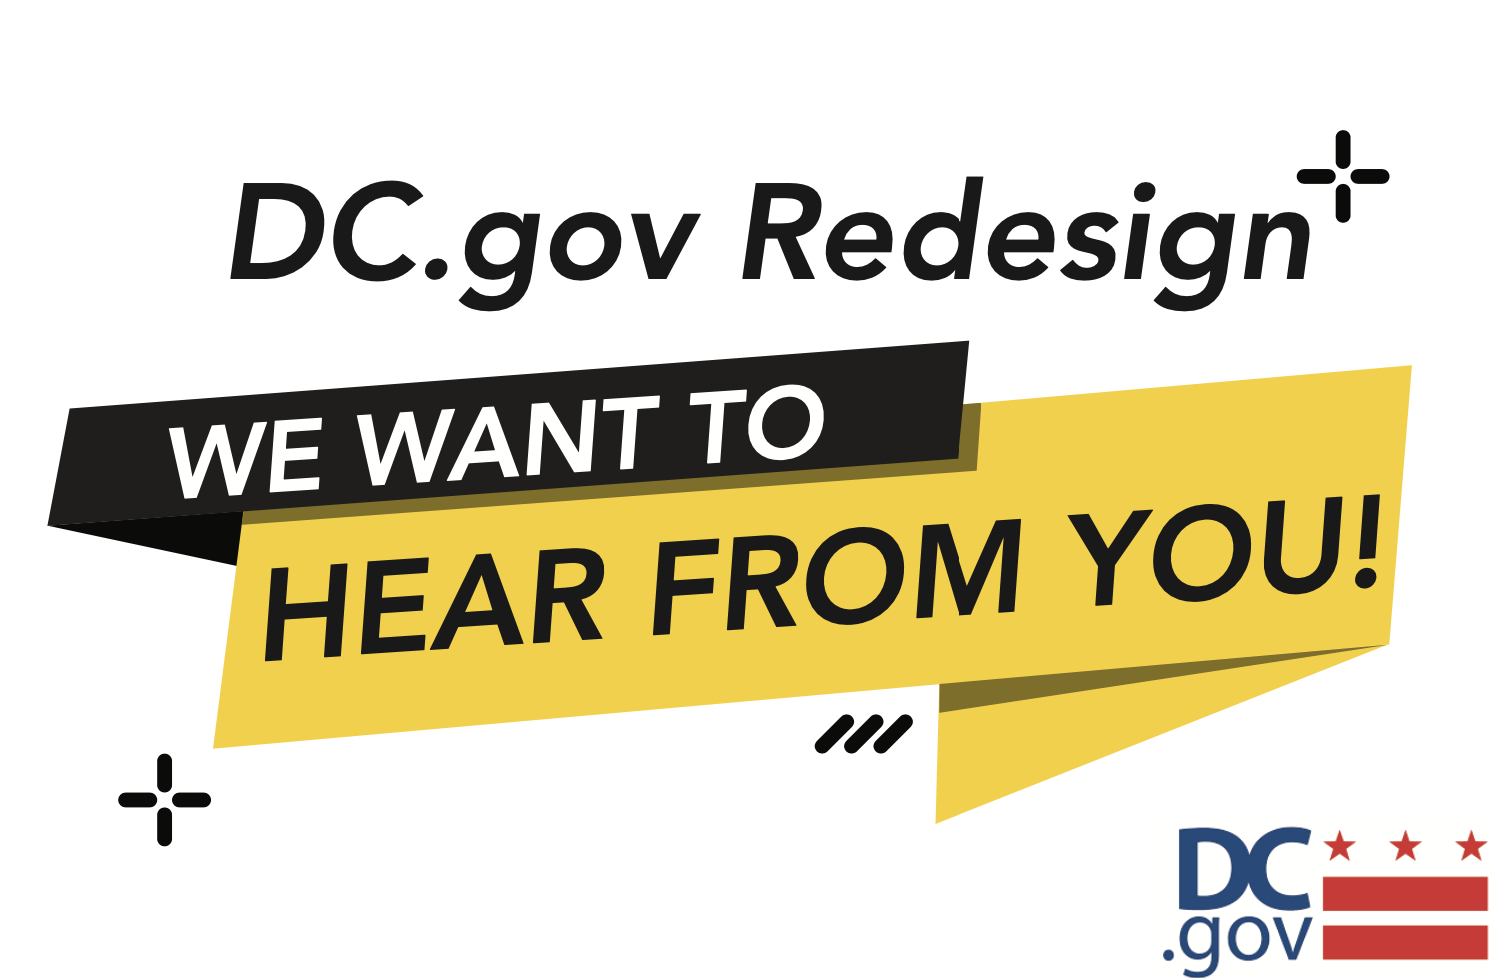 We want to hear from you on the upcoming redesign of DC.gov